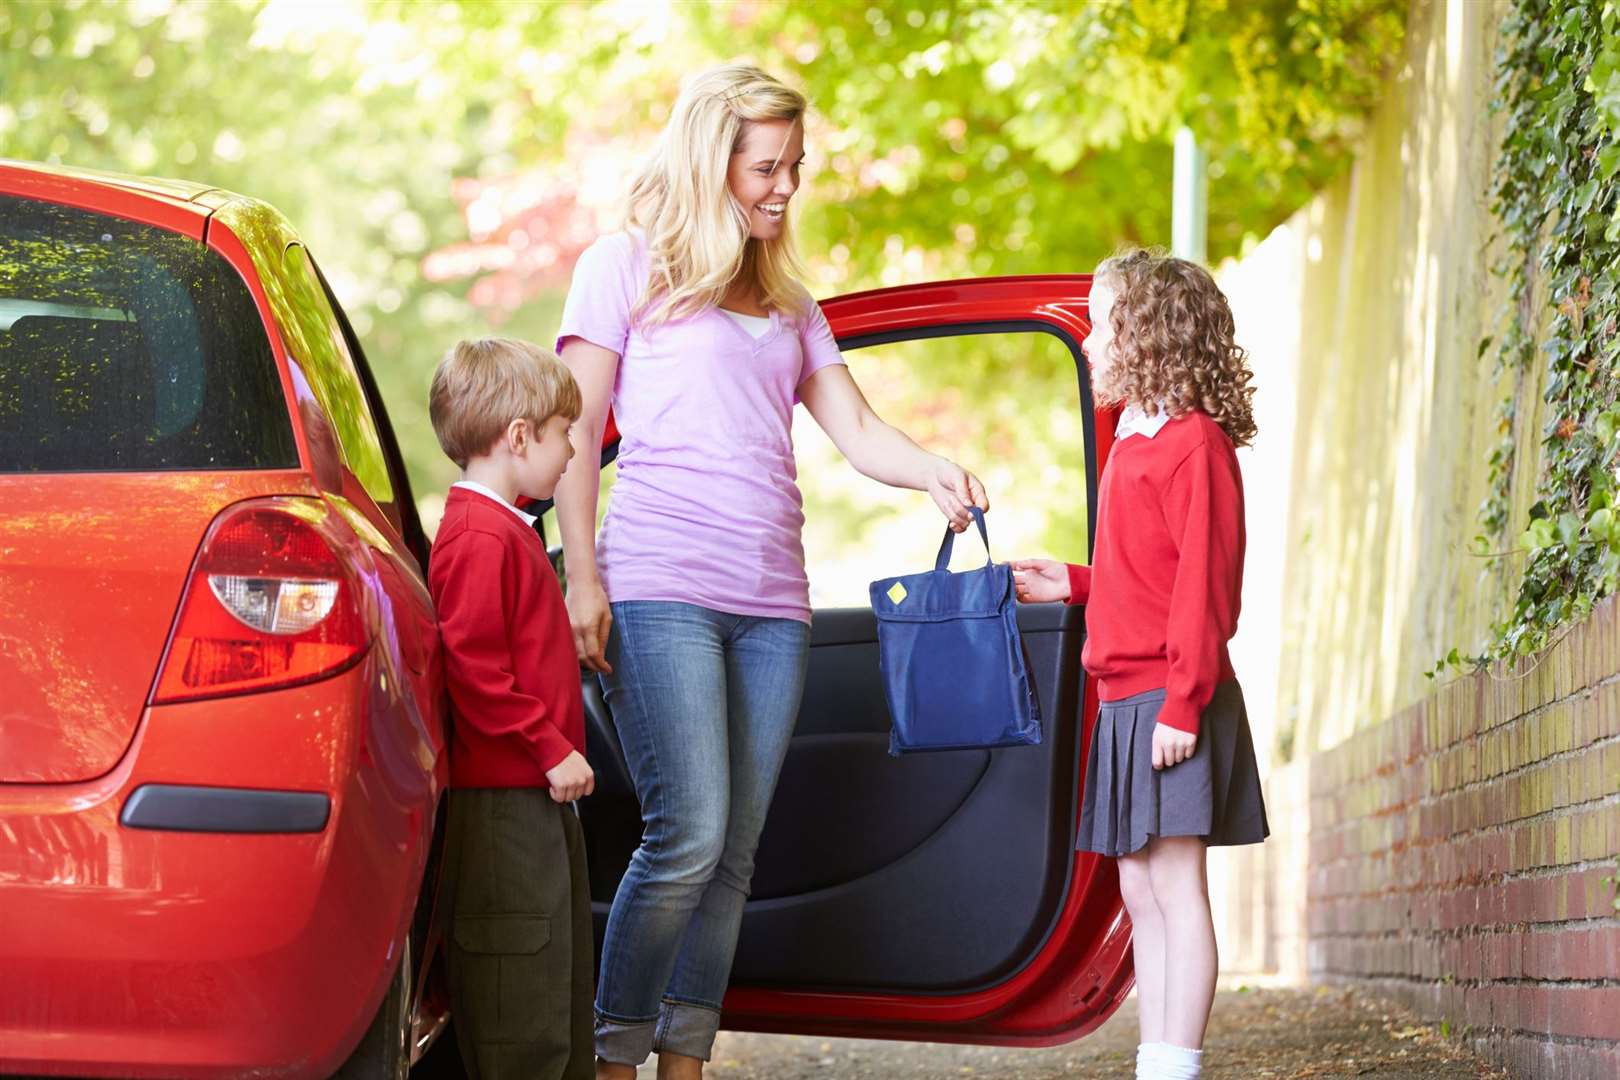 The AA estimates a family could save £700 a year by making small changes to the way they drive